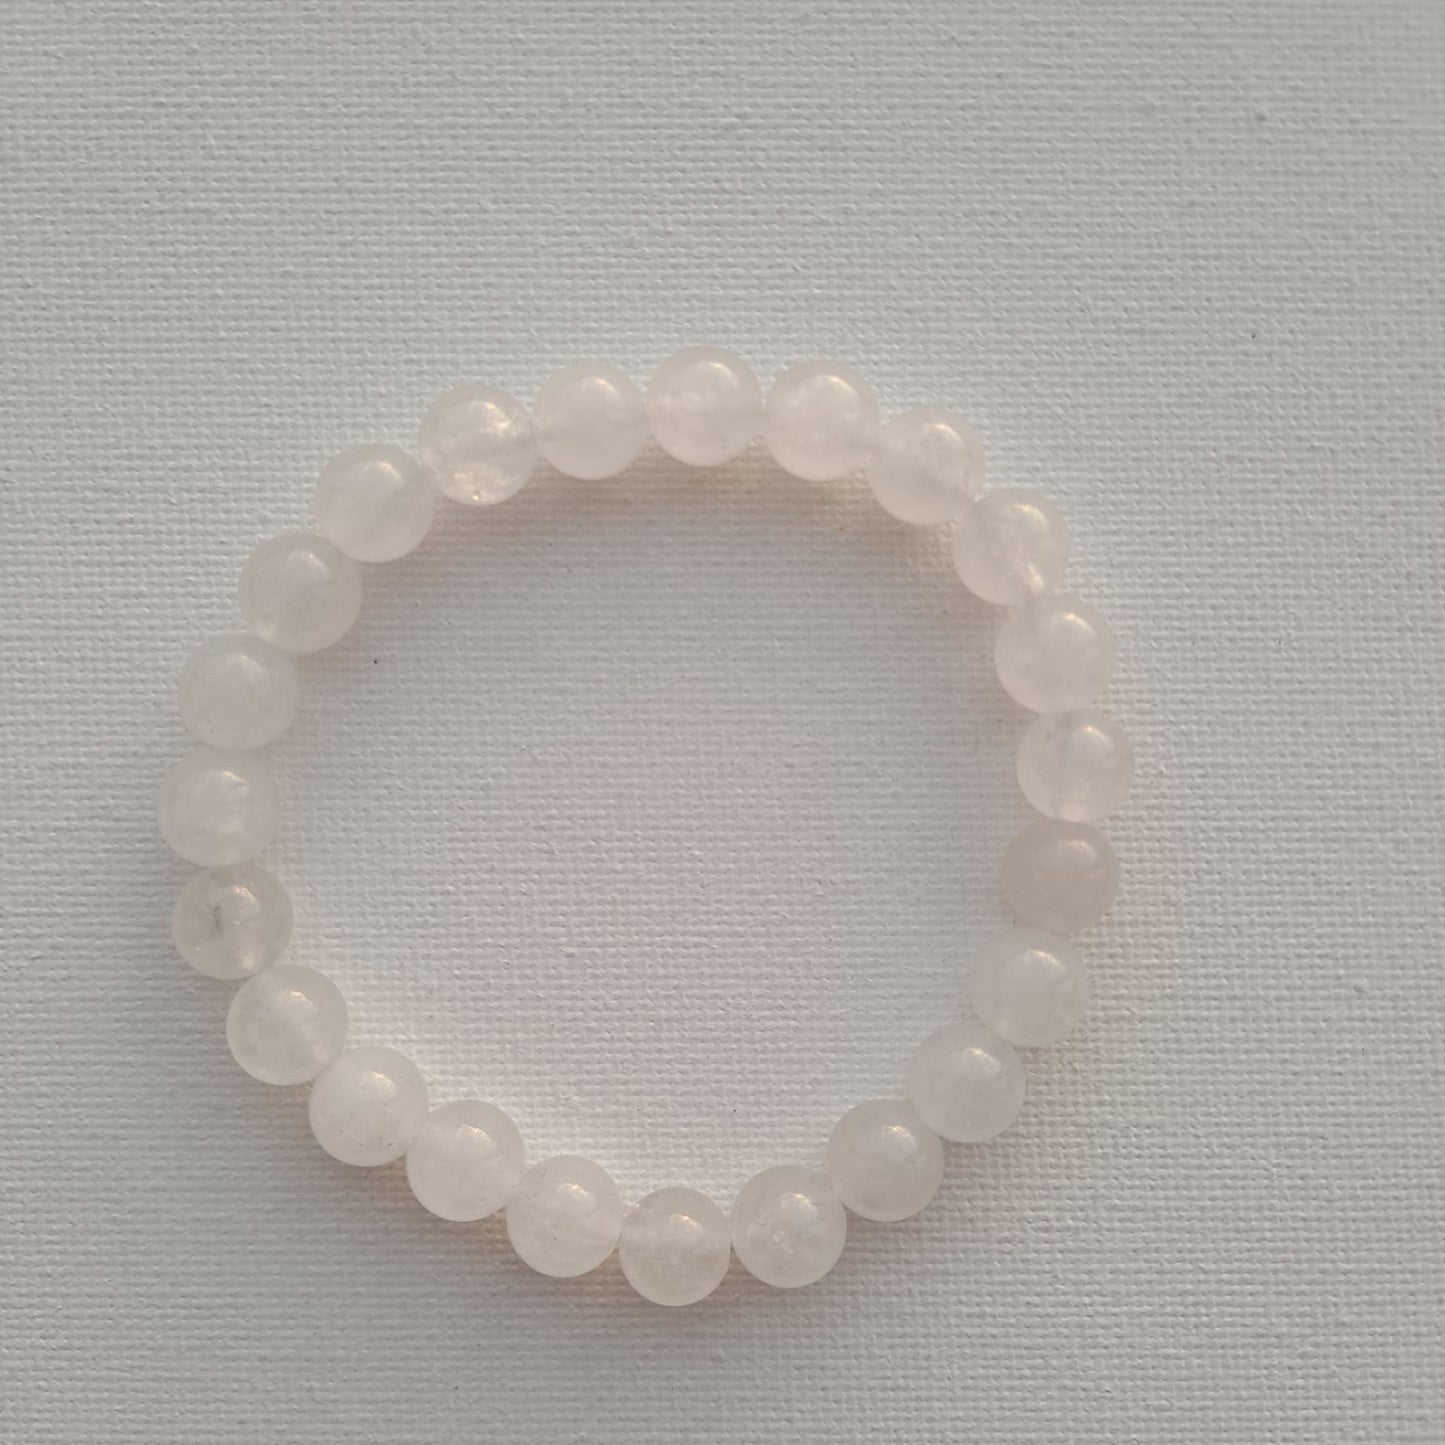 Dumi's Crystals | White Jade Stretch Bracelet (7 Inch with 8mm Beads) | Close-up of a handcrafted bracelet featuring genuine 8mm White Jade beads with a luminous glow. White Jade is known as the stone of peace and tranquility and is believed to promote inner peace, clarity of mind, spiritual growth, and emotional balance.